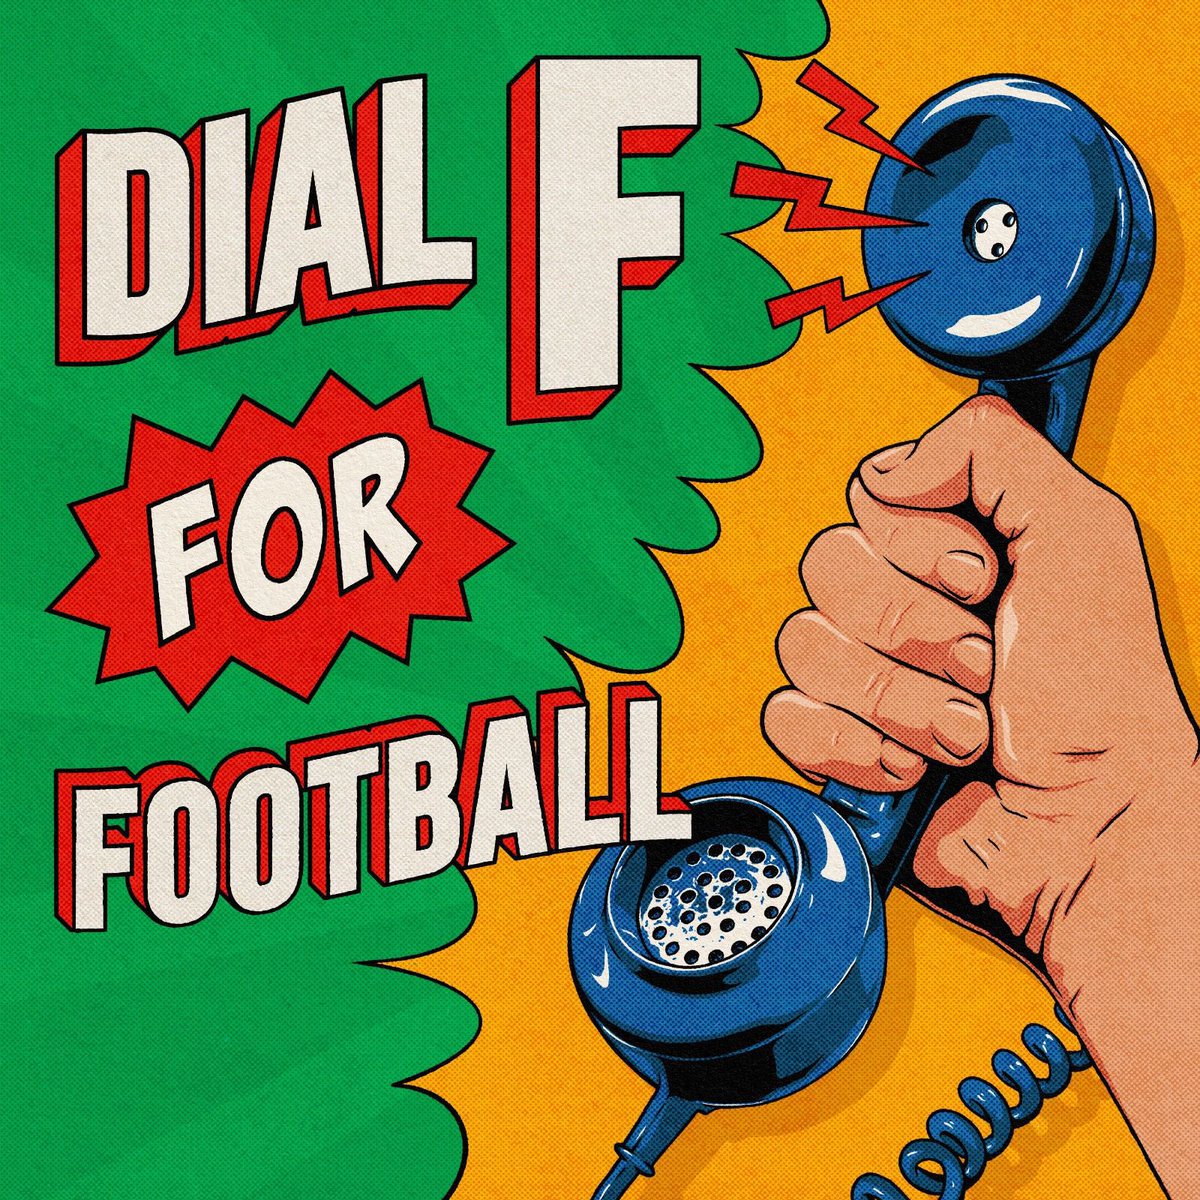 Dial F For Football is a new podcast series set on a radio station called Totalsport FM, and it follows new presenter Lisa as she navigates condescending callers and a ‘traditional’ listener base. Produced by our mate @DJTayo, it is brilliant and out today. Give it a bang.